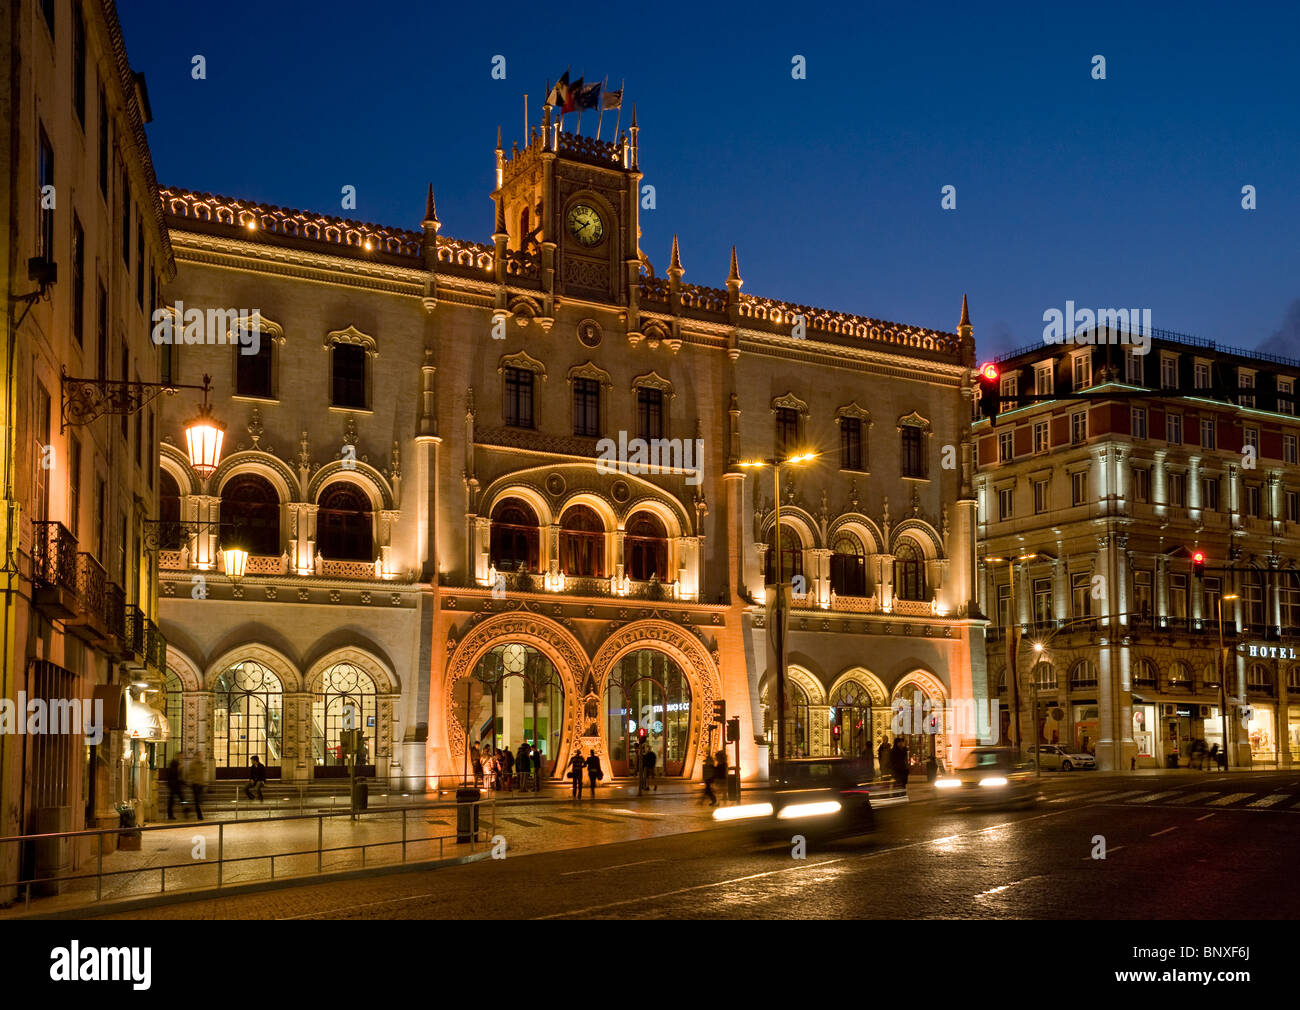 Portugal Lisbon, The Estacao Do Rossio Railway Station At Night Stock Photo